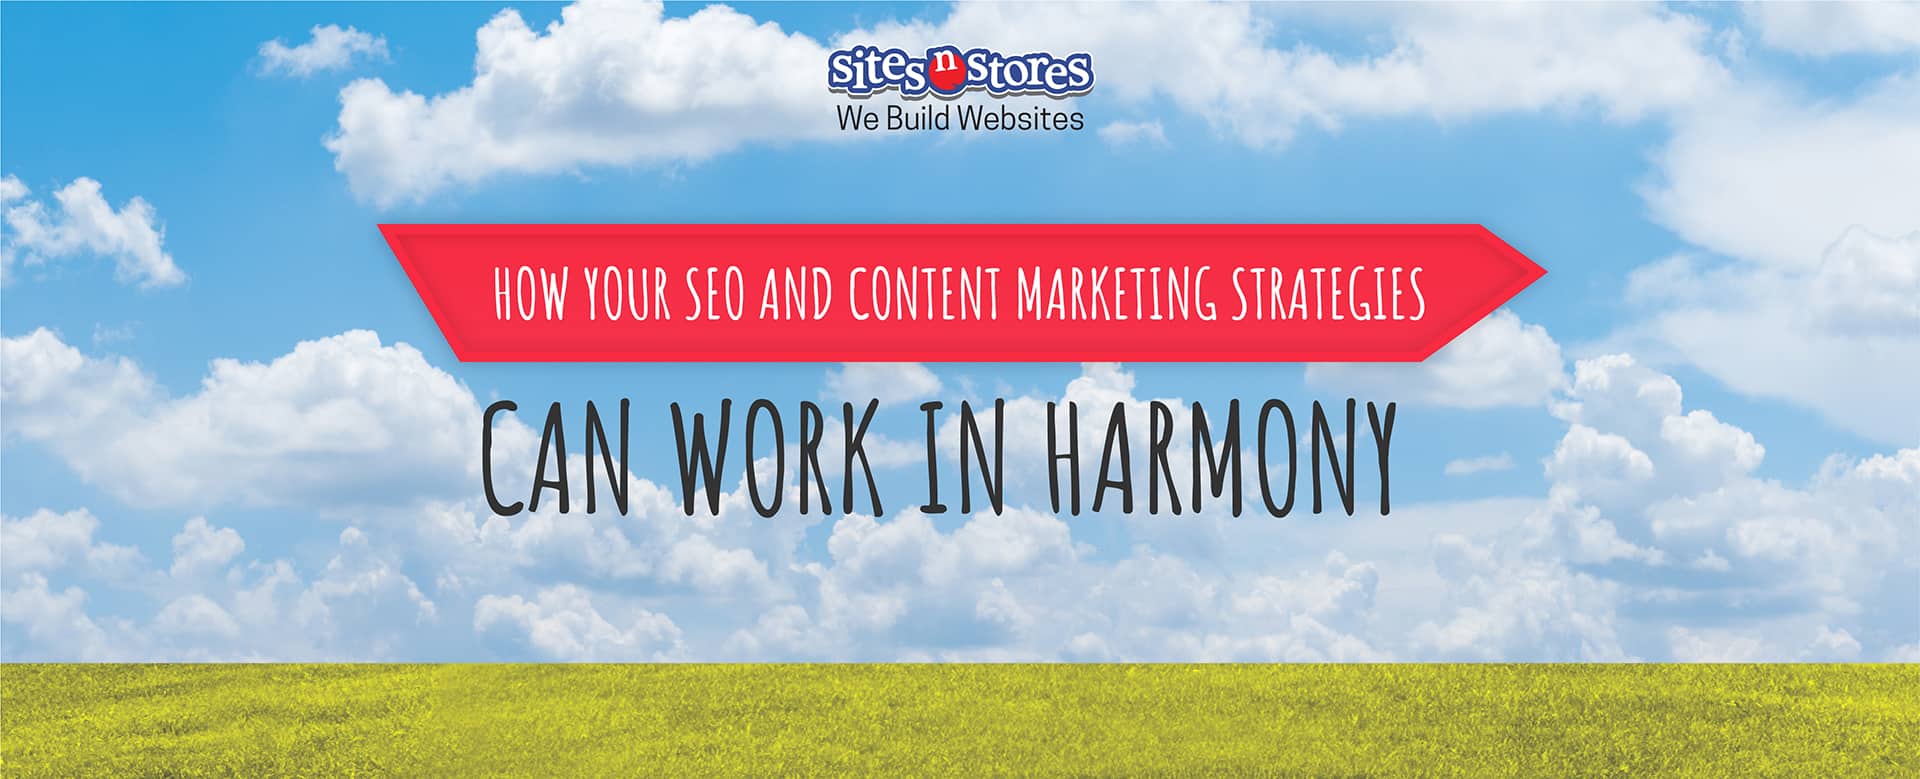 How Your SEO and Content Marketing Strategies Can Work in Harmony